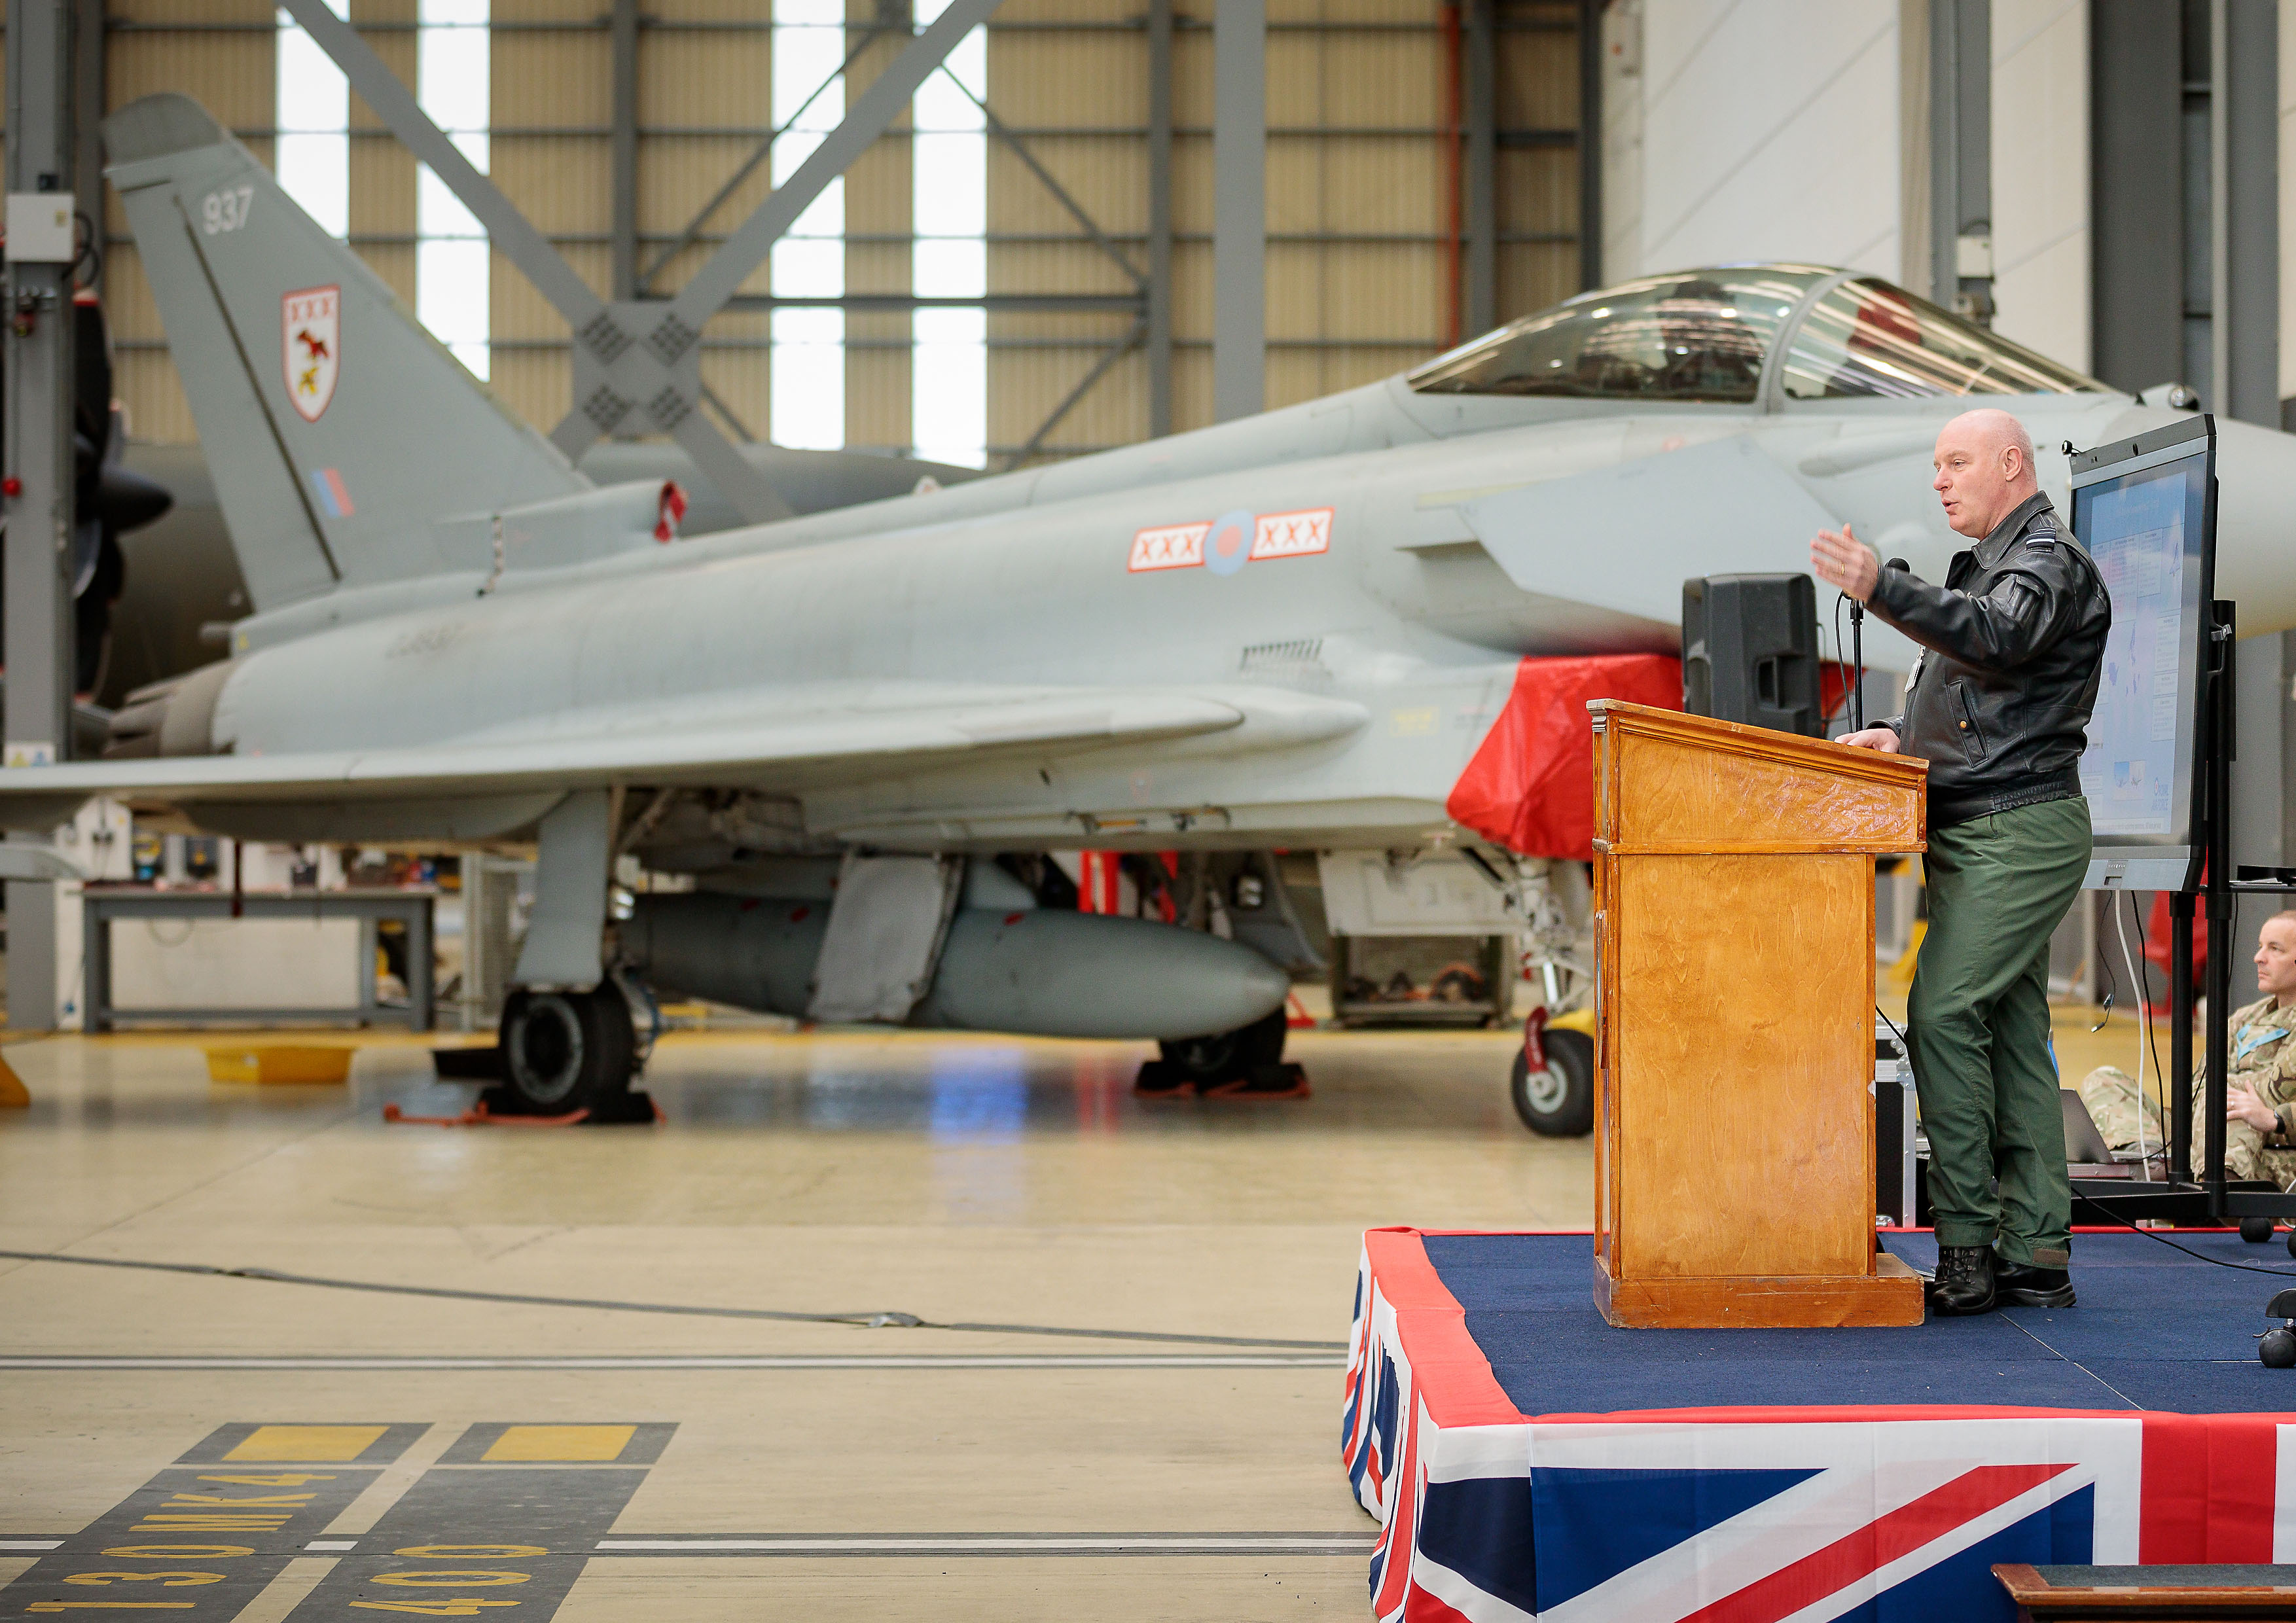 Image shows Typhoon in the hangar by RAF aviator presenting on a stage.